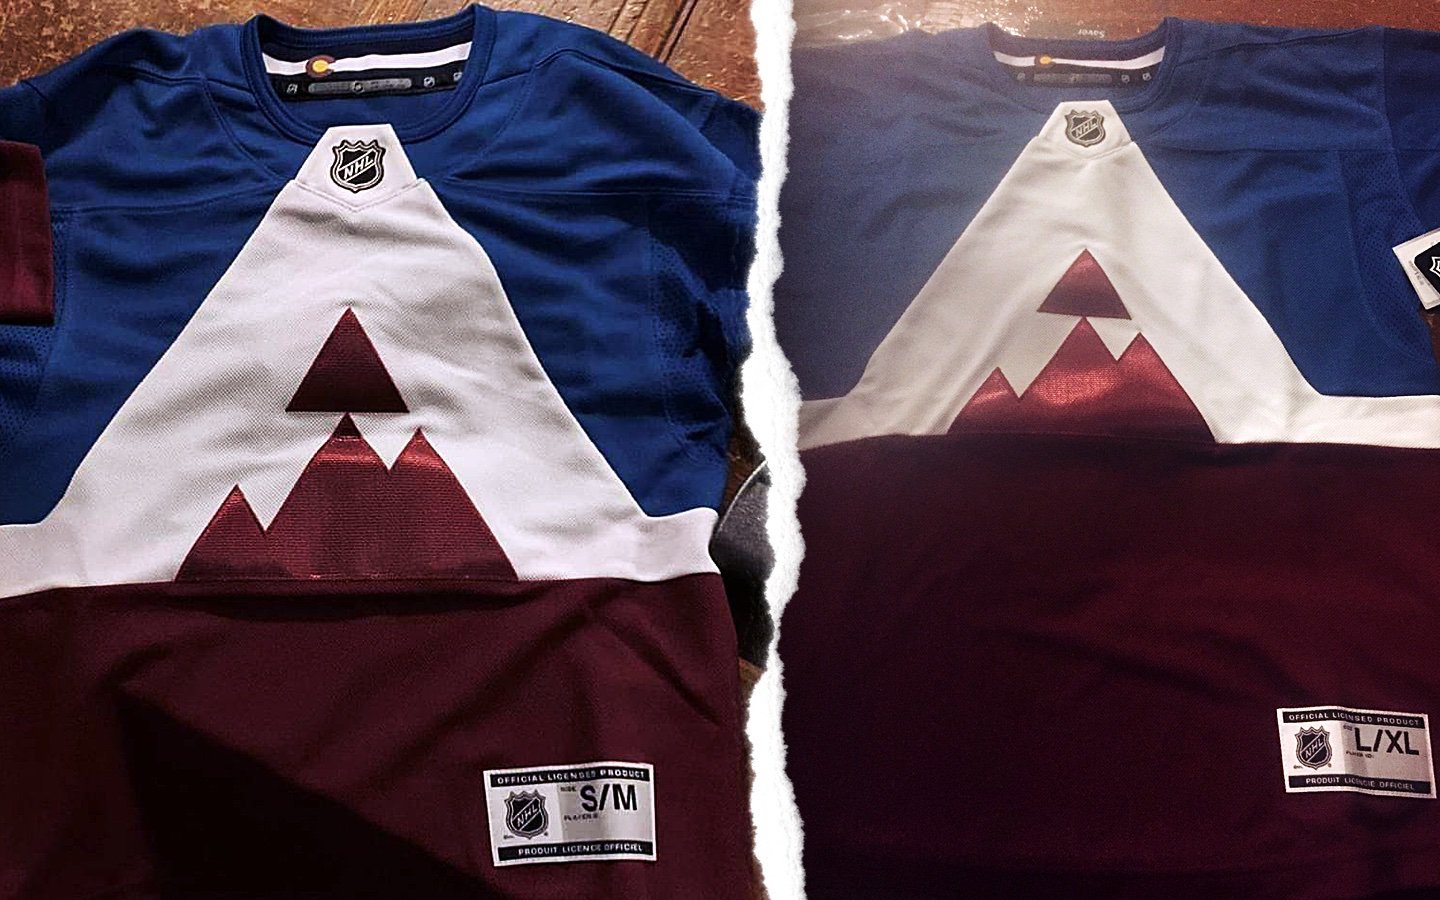 icethetics on X: COYOTES LEAK: Since it appears then #Yotes new third  jersey has leaked via @ibamboozIe, here's a side-by-side comparison with  the @CraigSMorgan photo showing the new gear that would go